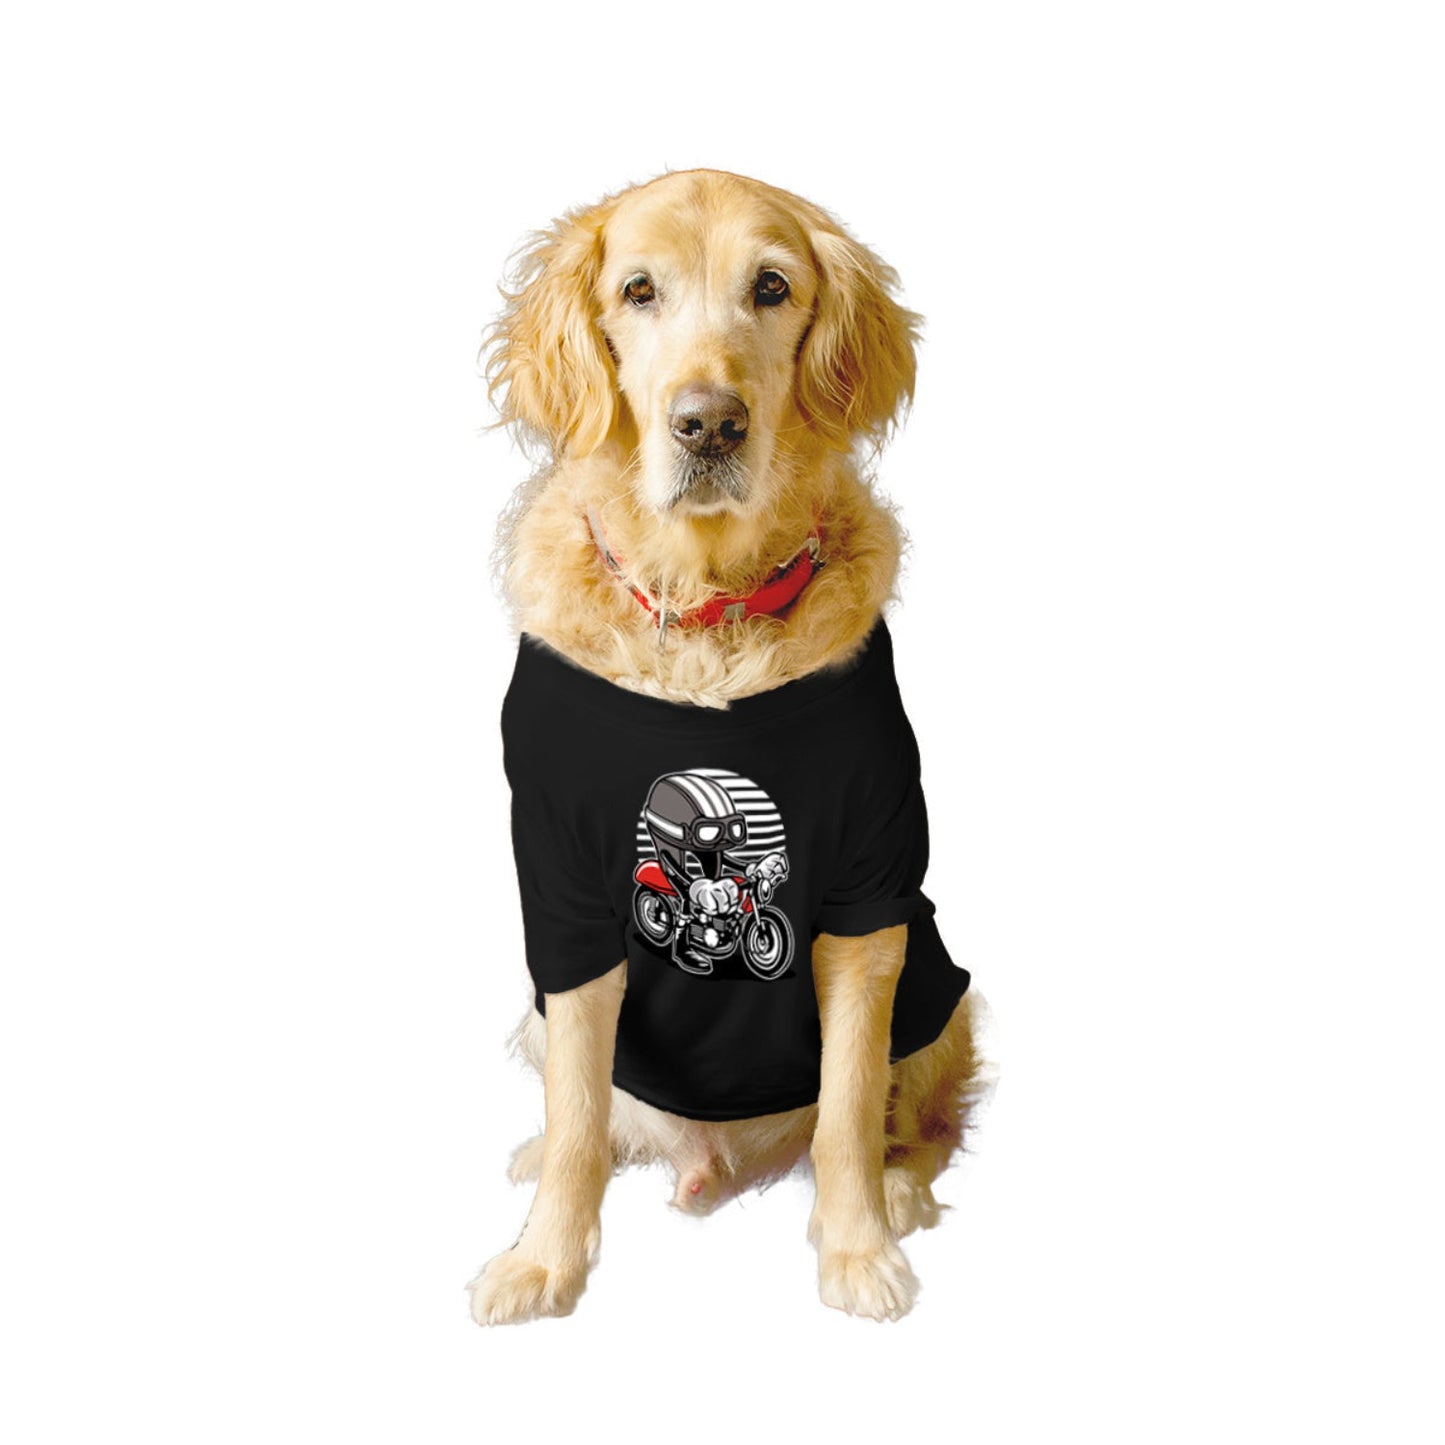 Ruse XX-Small (Chihuahuas, Papillons) / Black Ruse Basic Crew Neck "Cafe Racer Helmet" Printed Half Sleeves Dog Tee